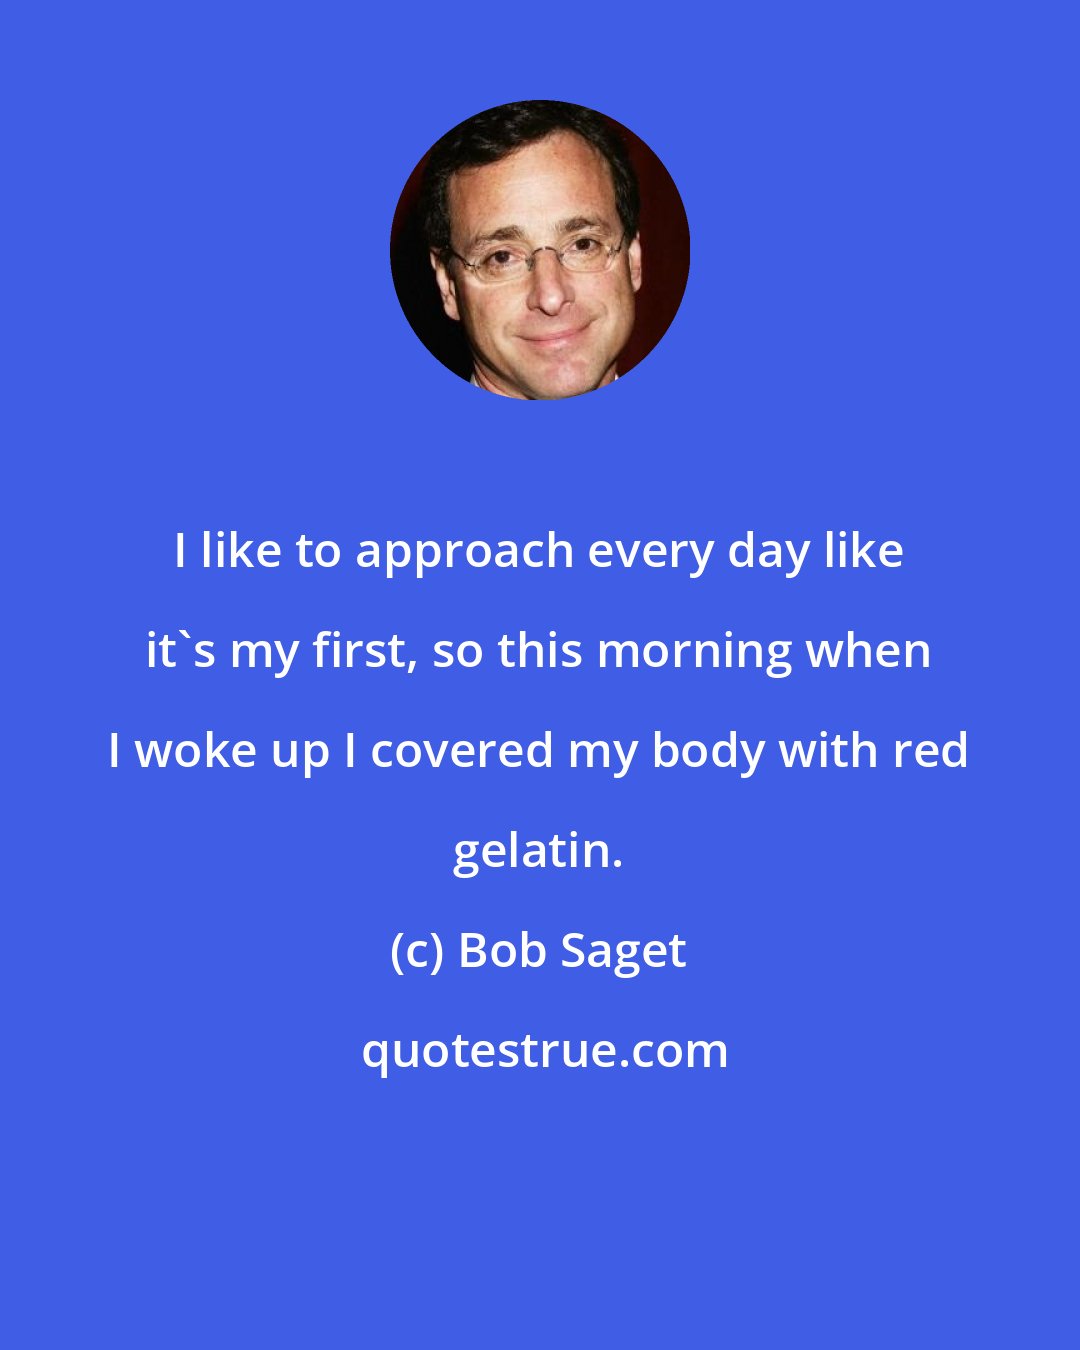 Bob Saget: I like to approach every day like it's my first, so this morning when I woke up I covered my body with red gelatin.